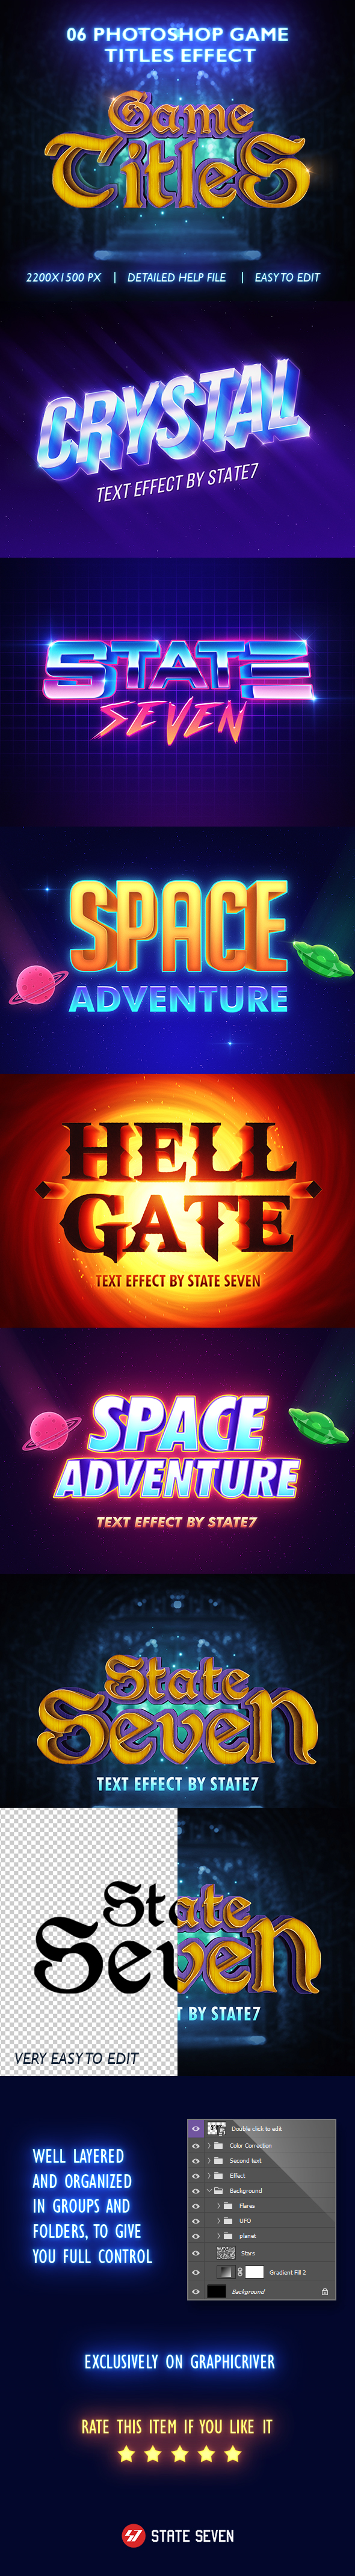 Games Titles Photoshop Text Effect